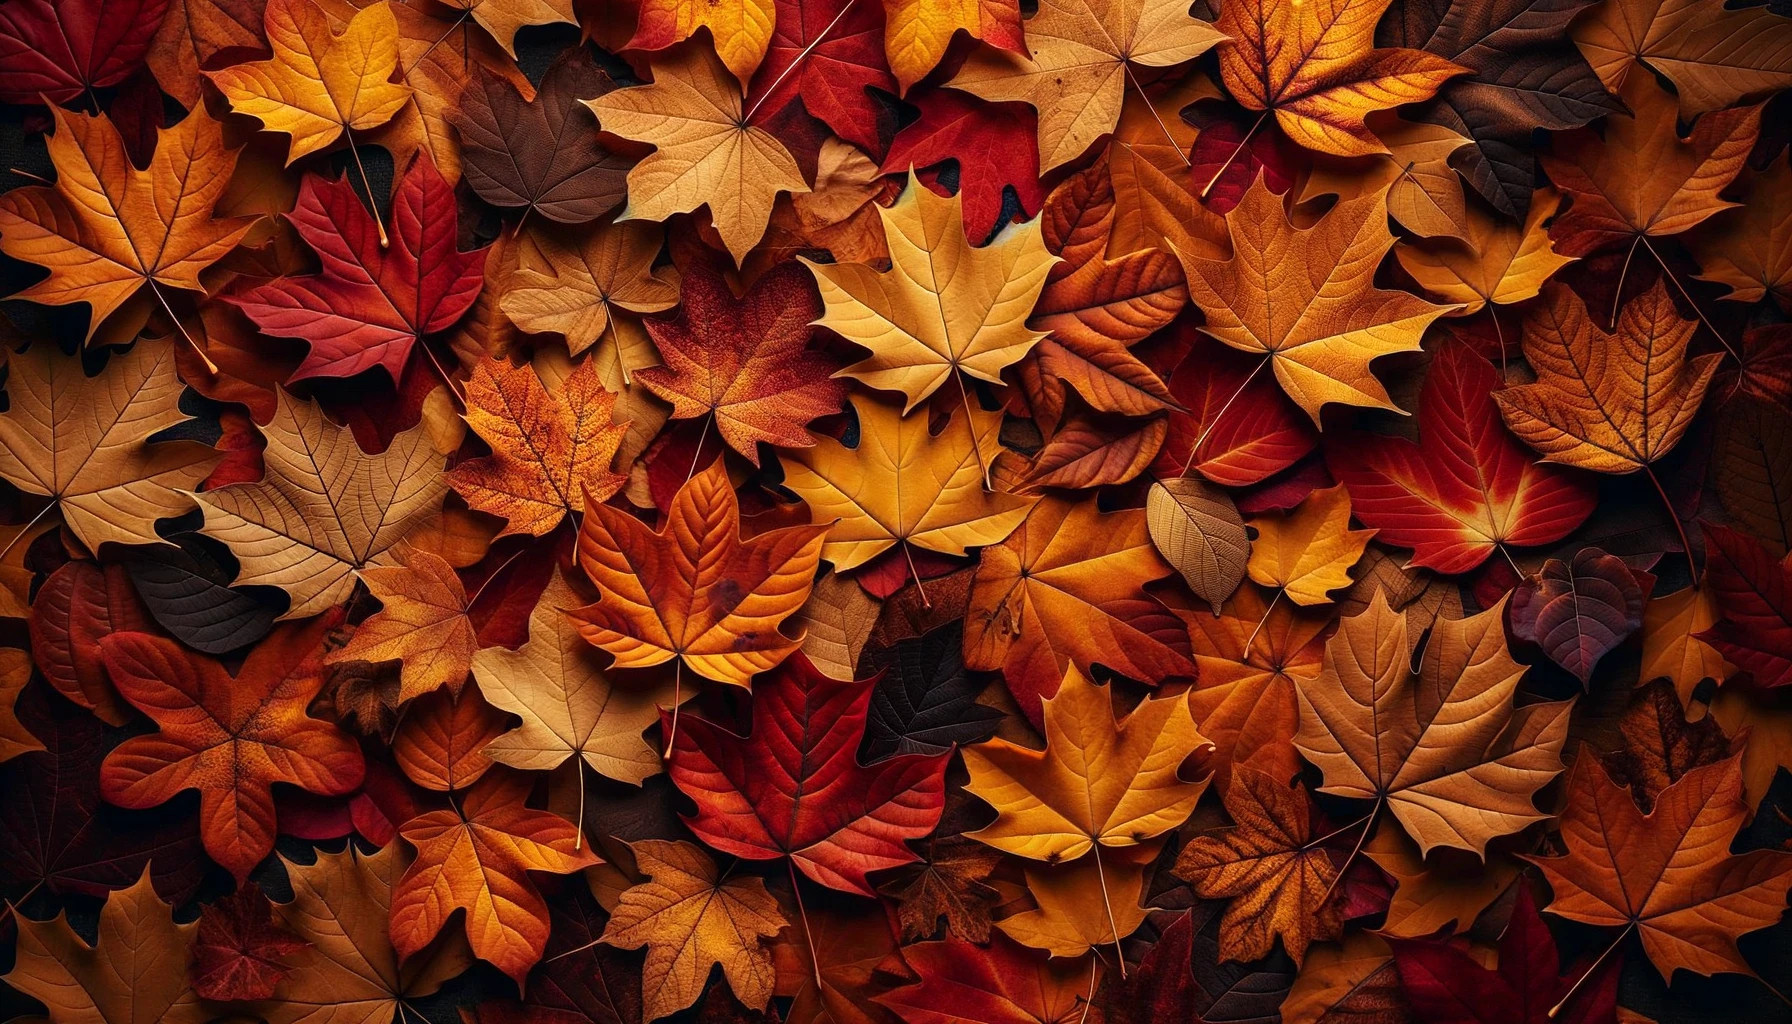 An AI-generated image of autumn leaves, created by DALL-E 3.